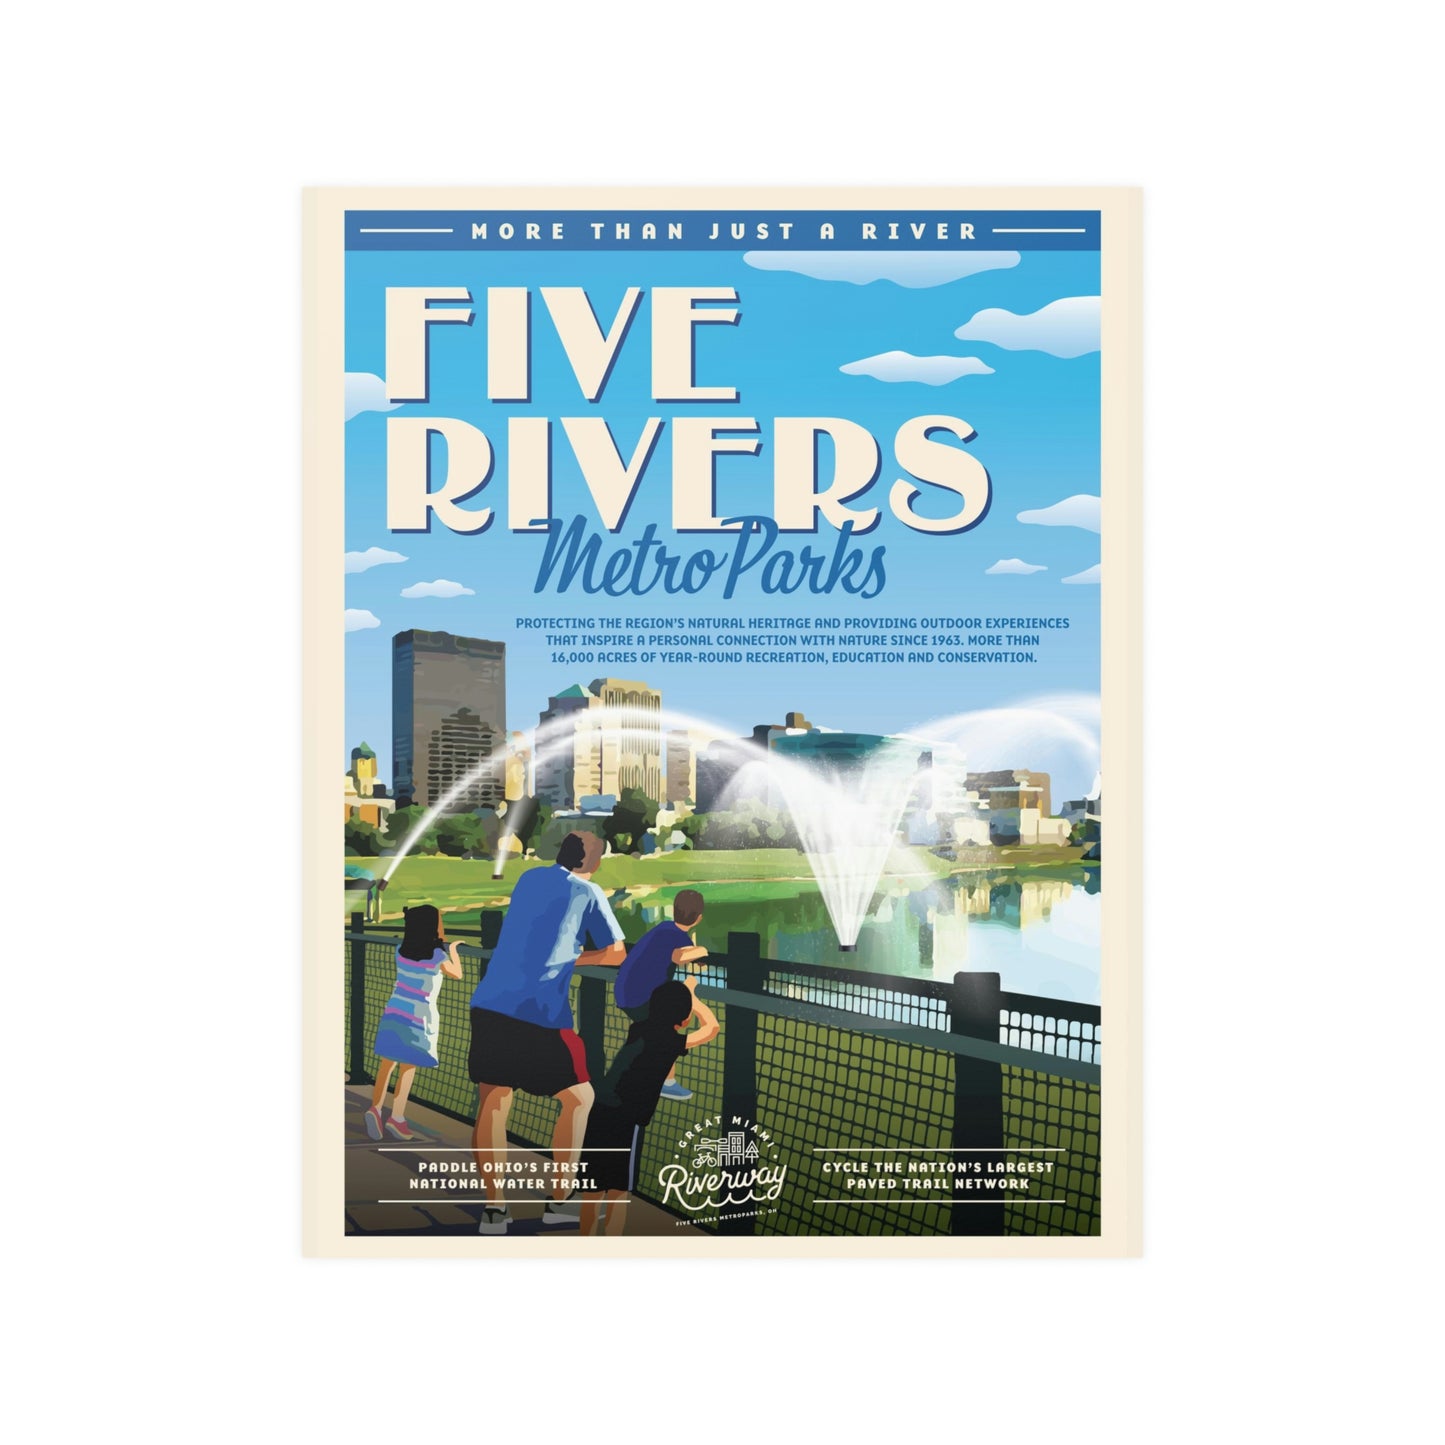 Five Rivers MetroParks Poster